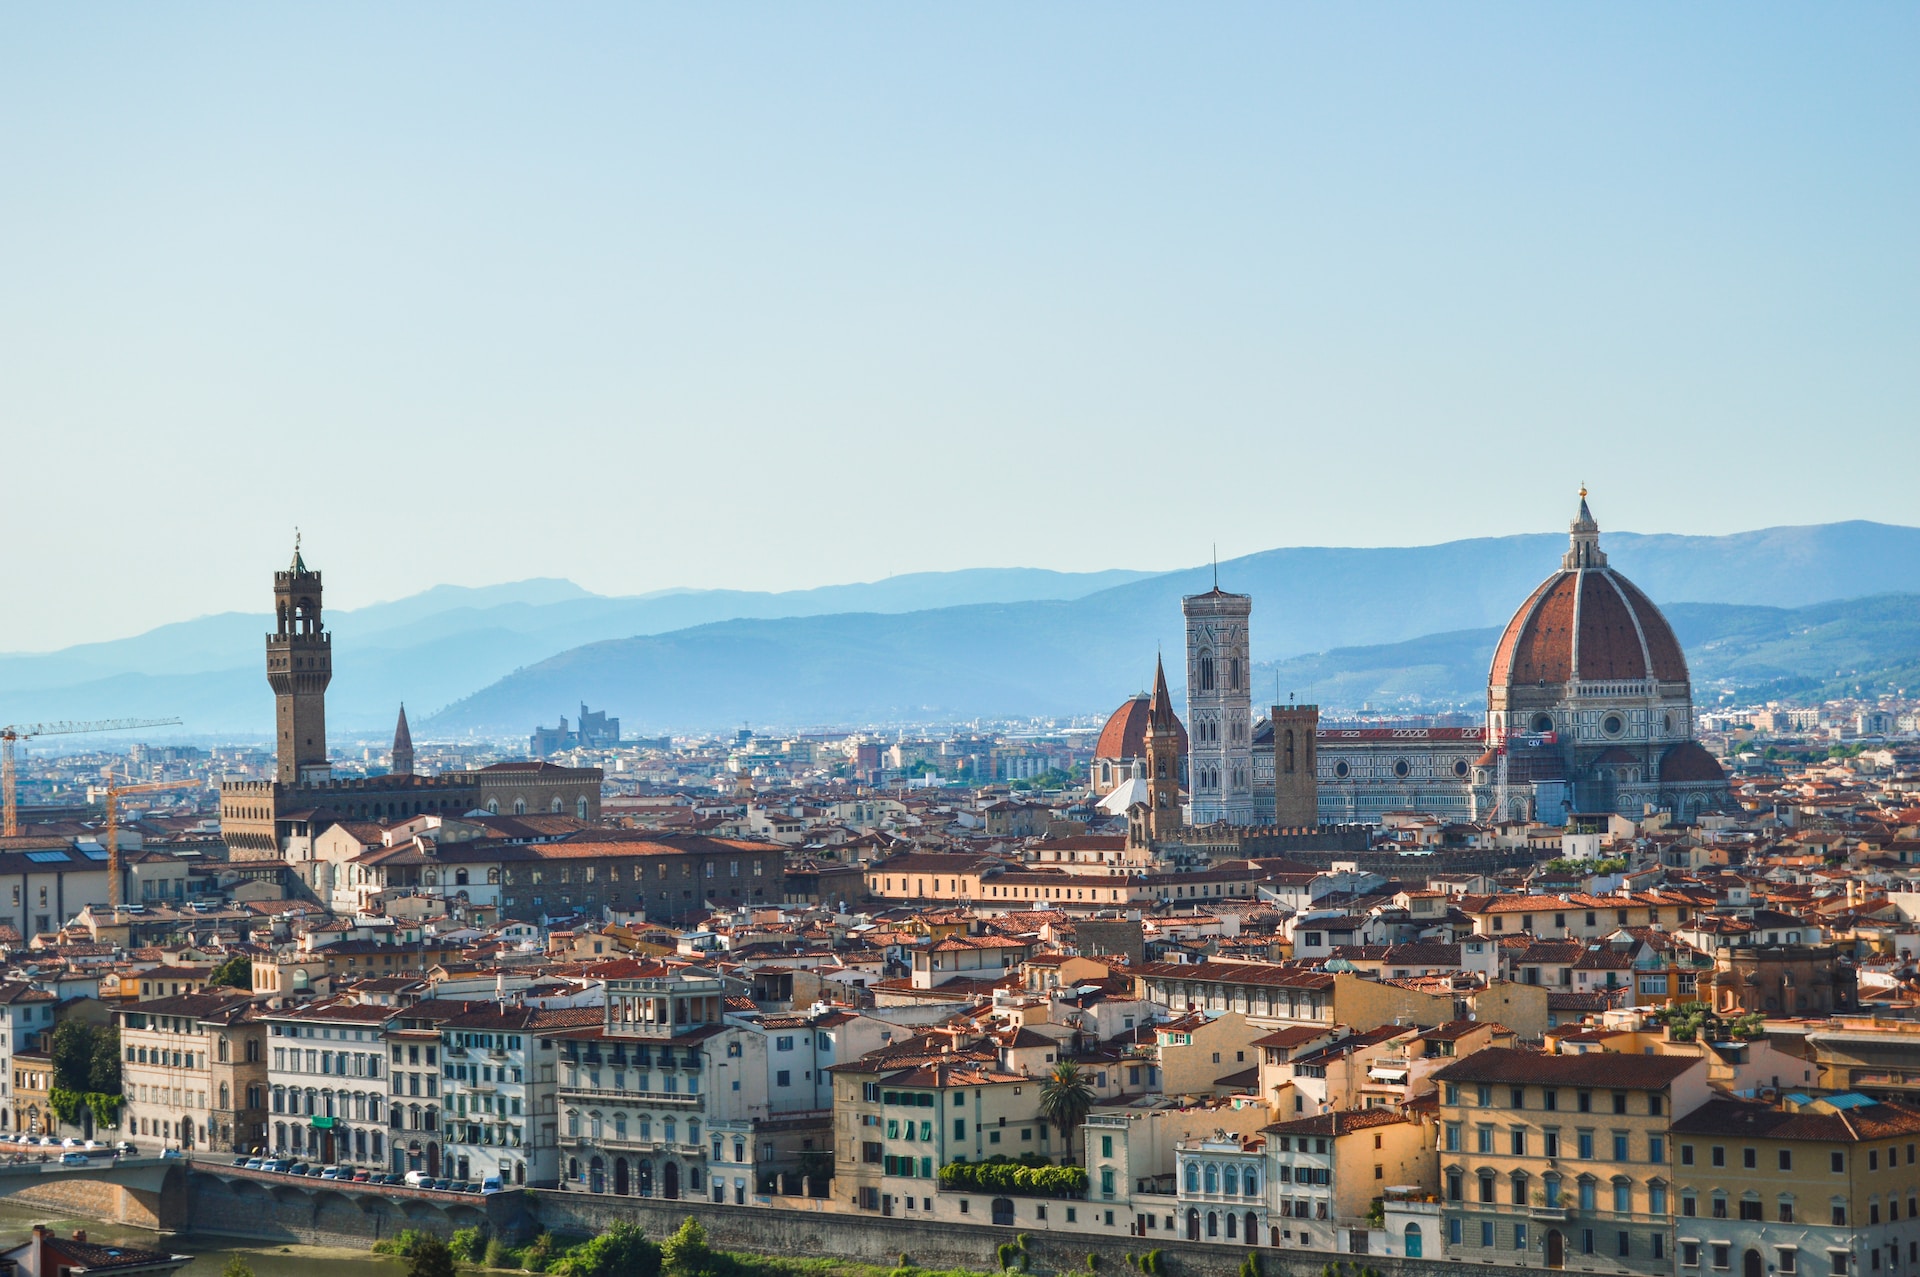 Photograph of central Florence, looking ancient and beautiful, like a setting these historical fiction editors would be able to help you flesh out.